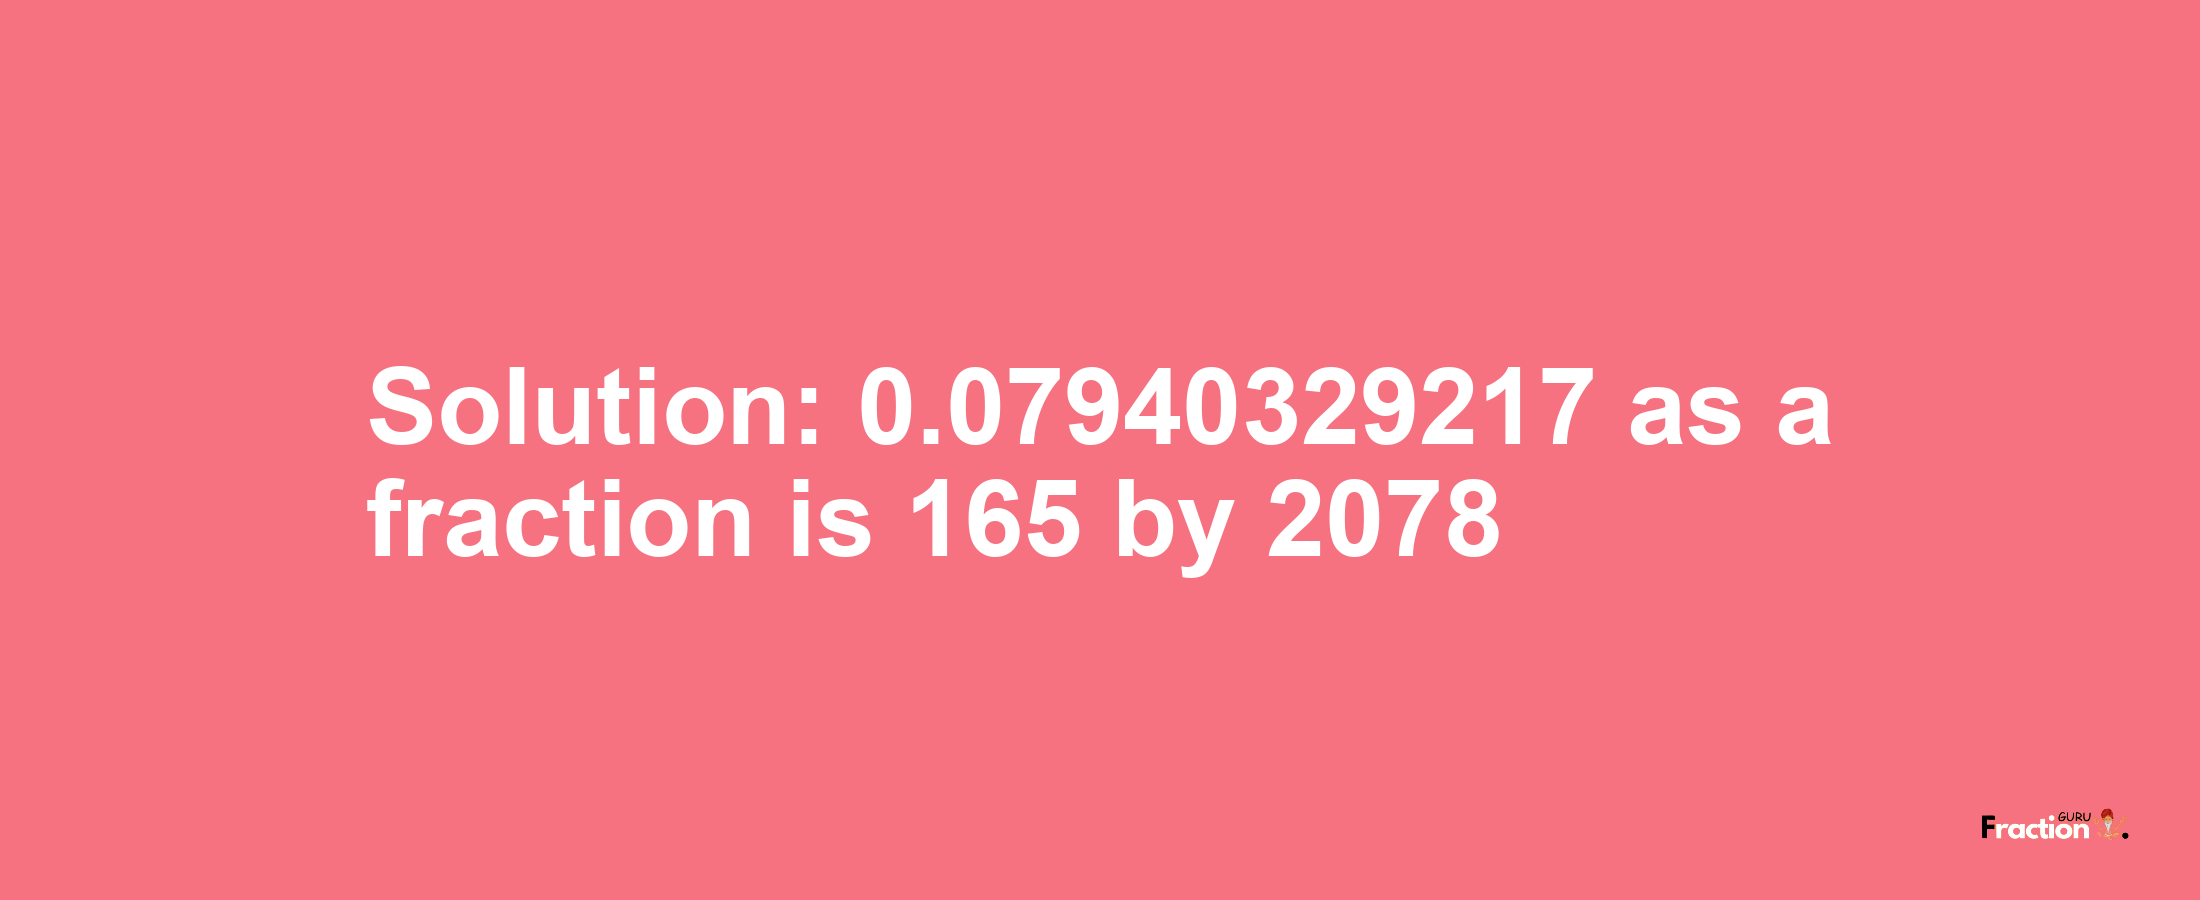 Solution:0.07940329217 as a fraction is 165/2078